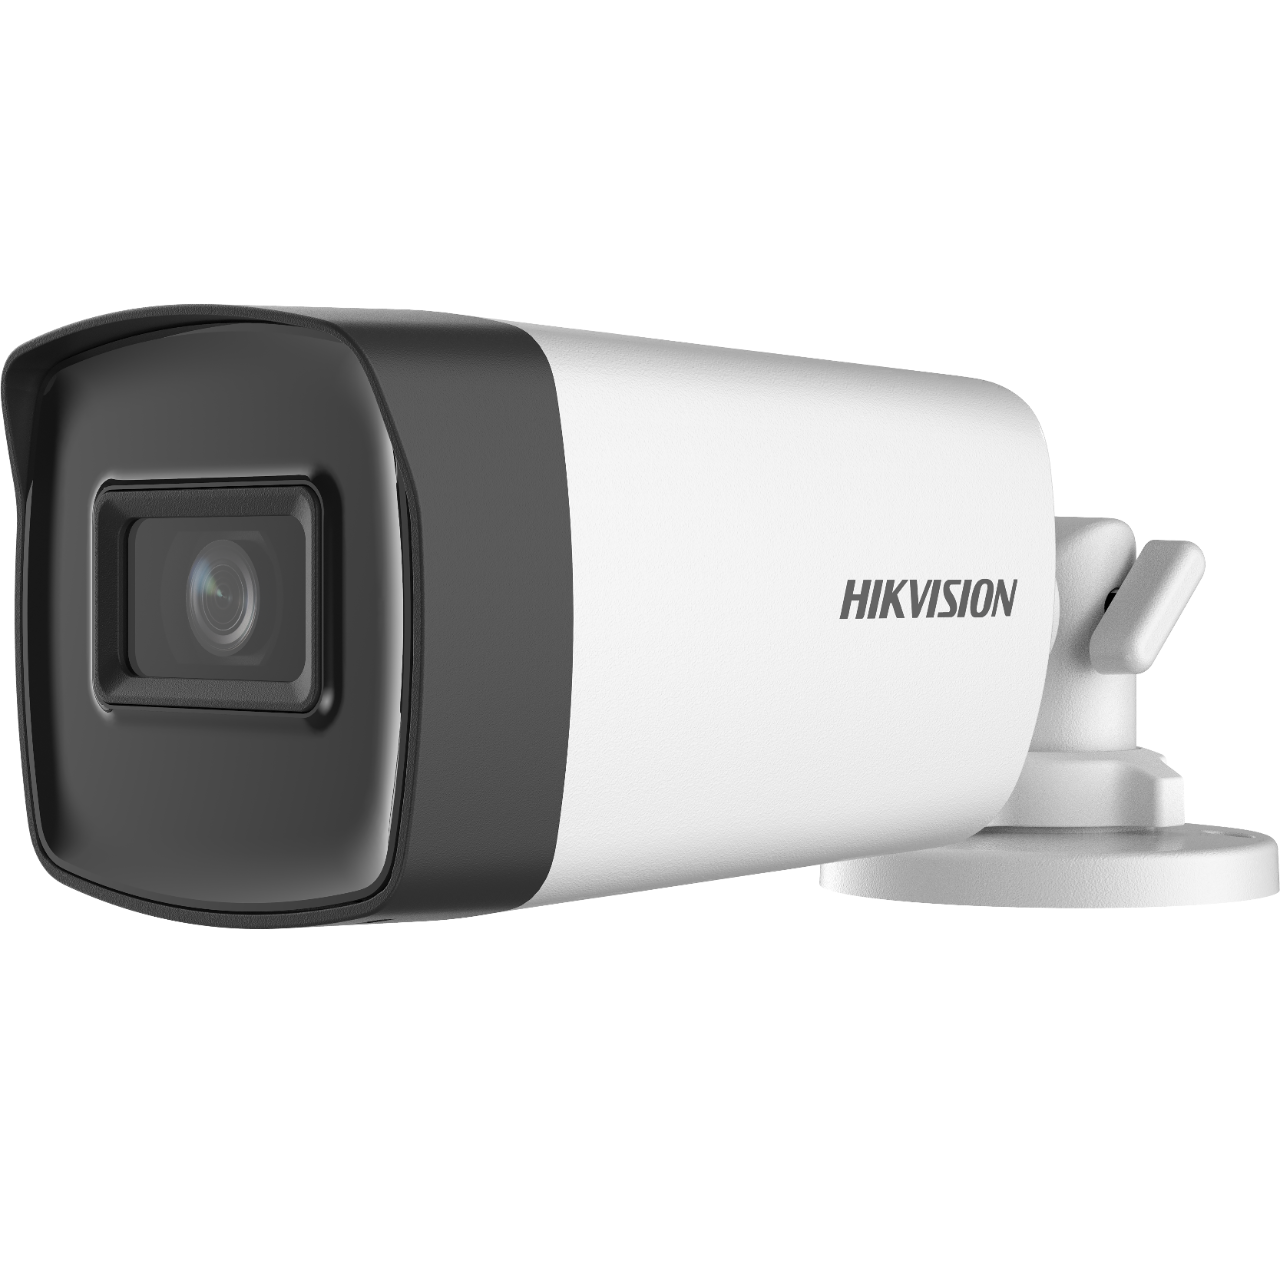 Hikvision (DS-2CE17H0T-IT3F) 5 MP Fixed Bullet Camera